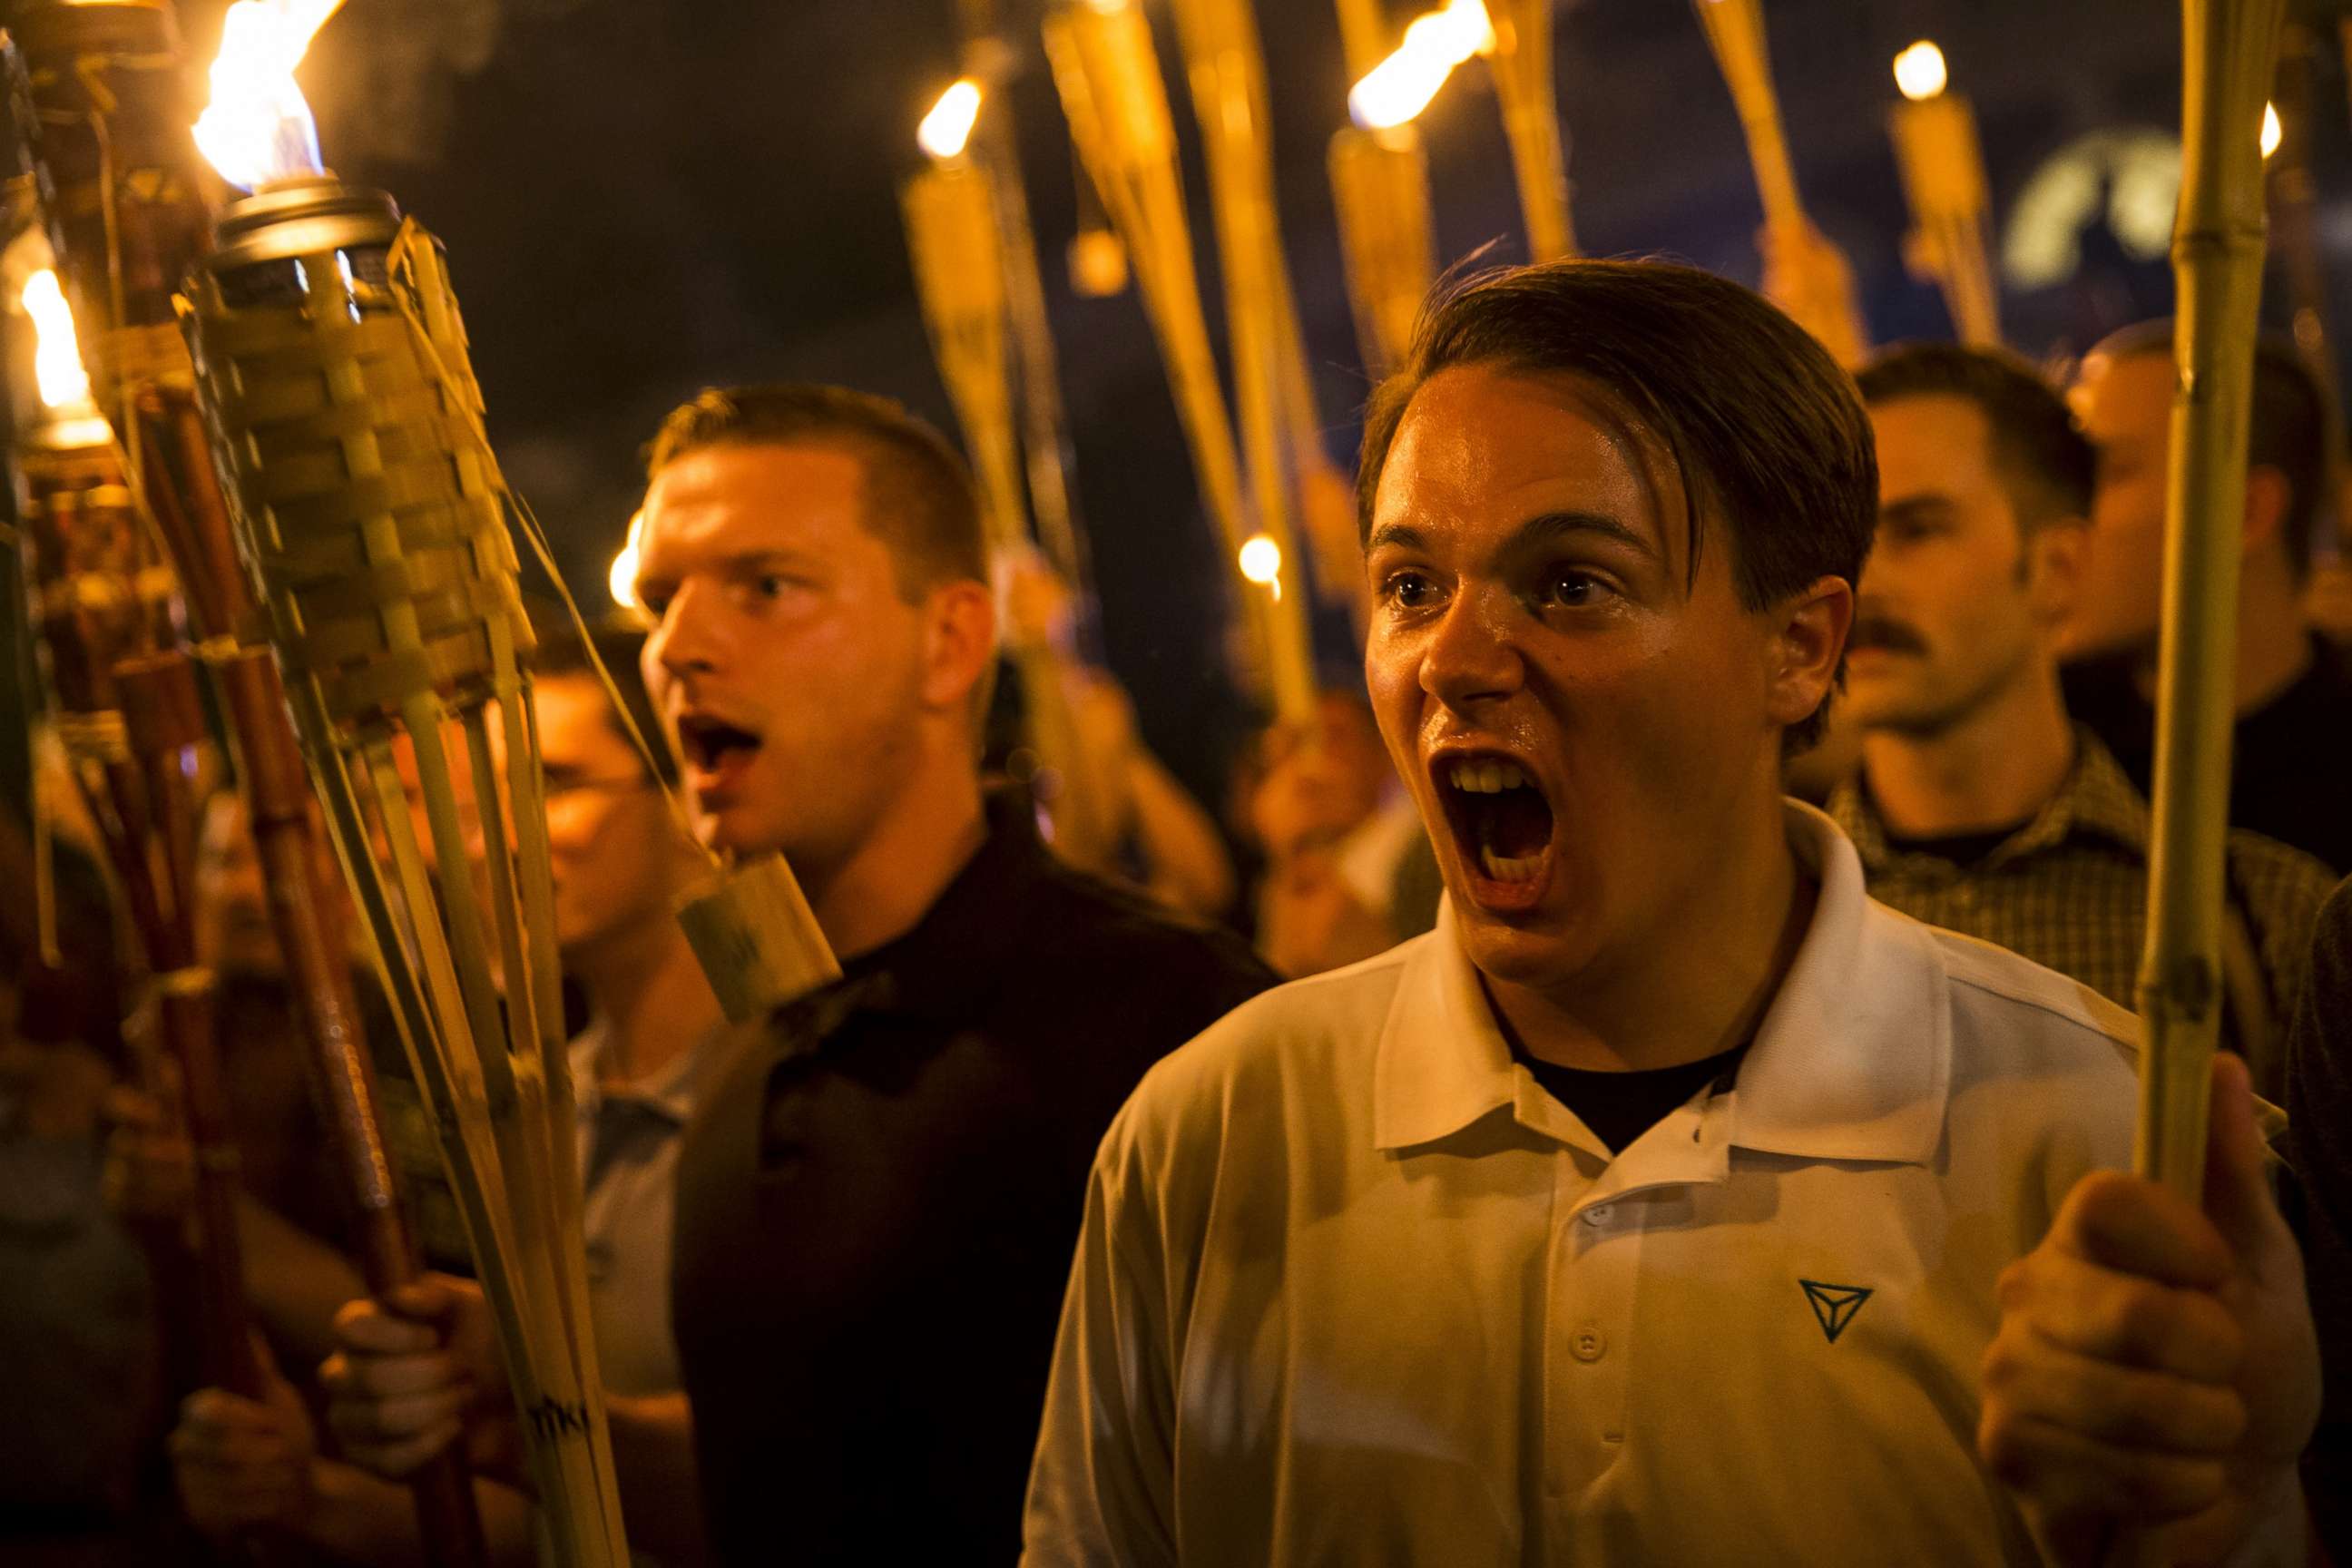 PHOTO: Peter Cvjetanovic, right,along with Neo Nazis, Alt-Right, and White Supremacists encircle and chant at counter protesters after marching through the University of Virginia campus with torches in Charlottesville, Va., on Aug. 11, 2017. 